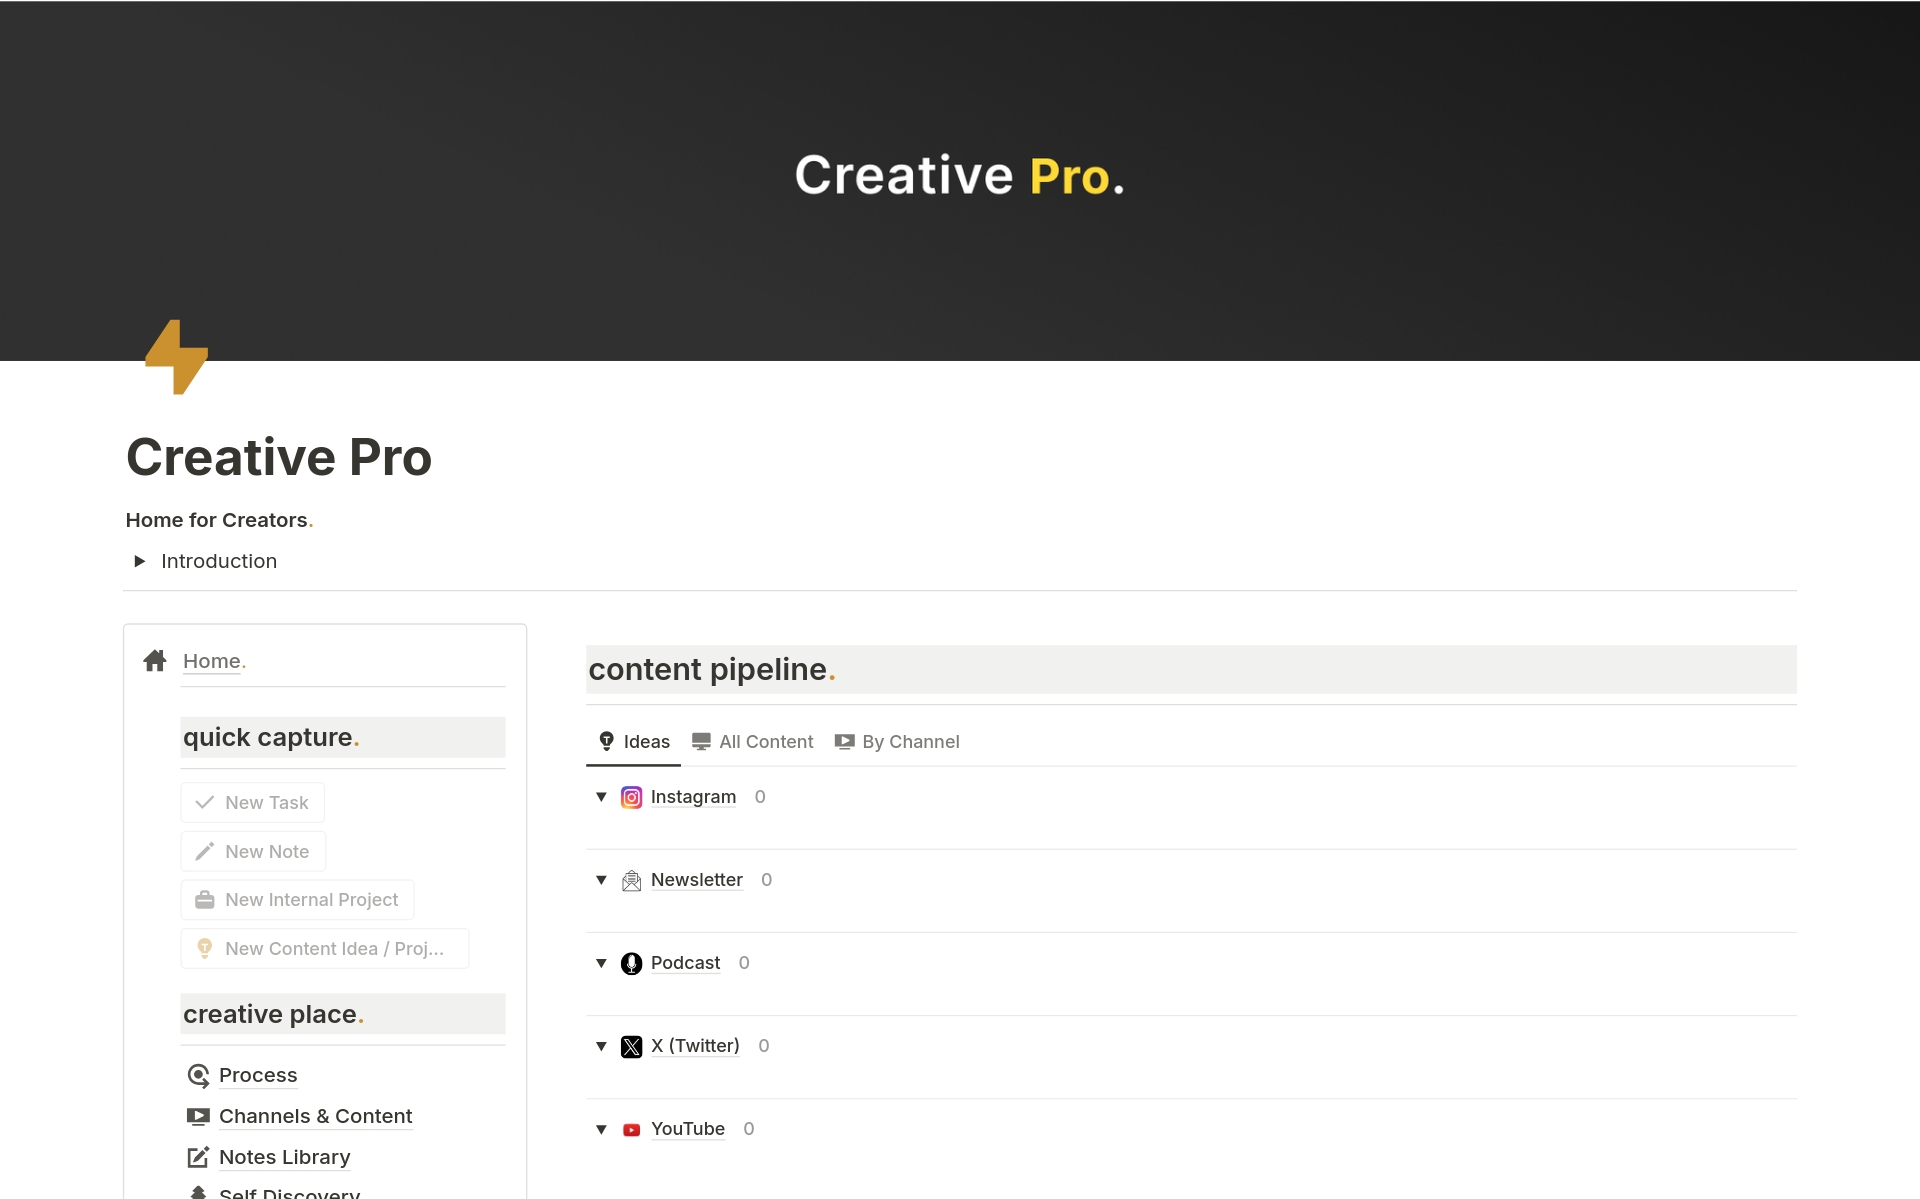 A very intuitive Notion Template to plan your content and internal projects, designed by Creators for Creators.